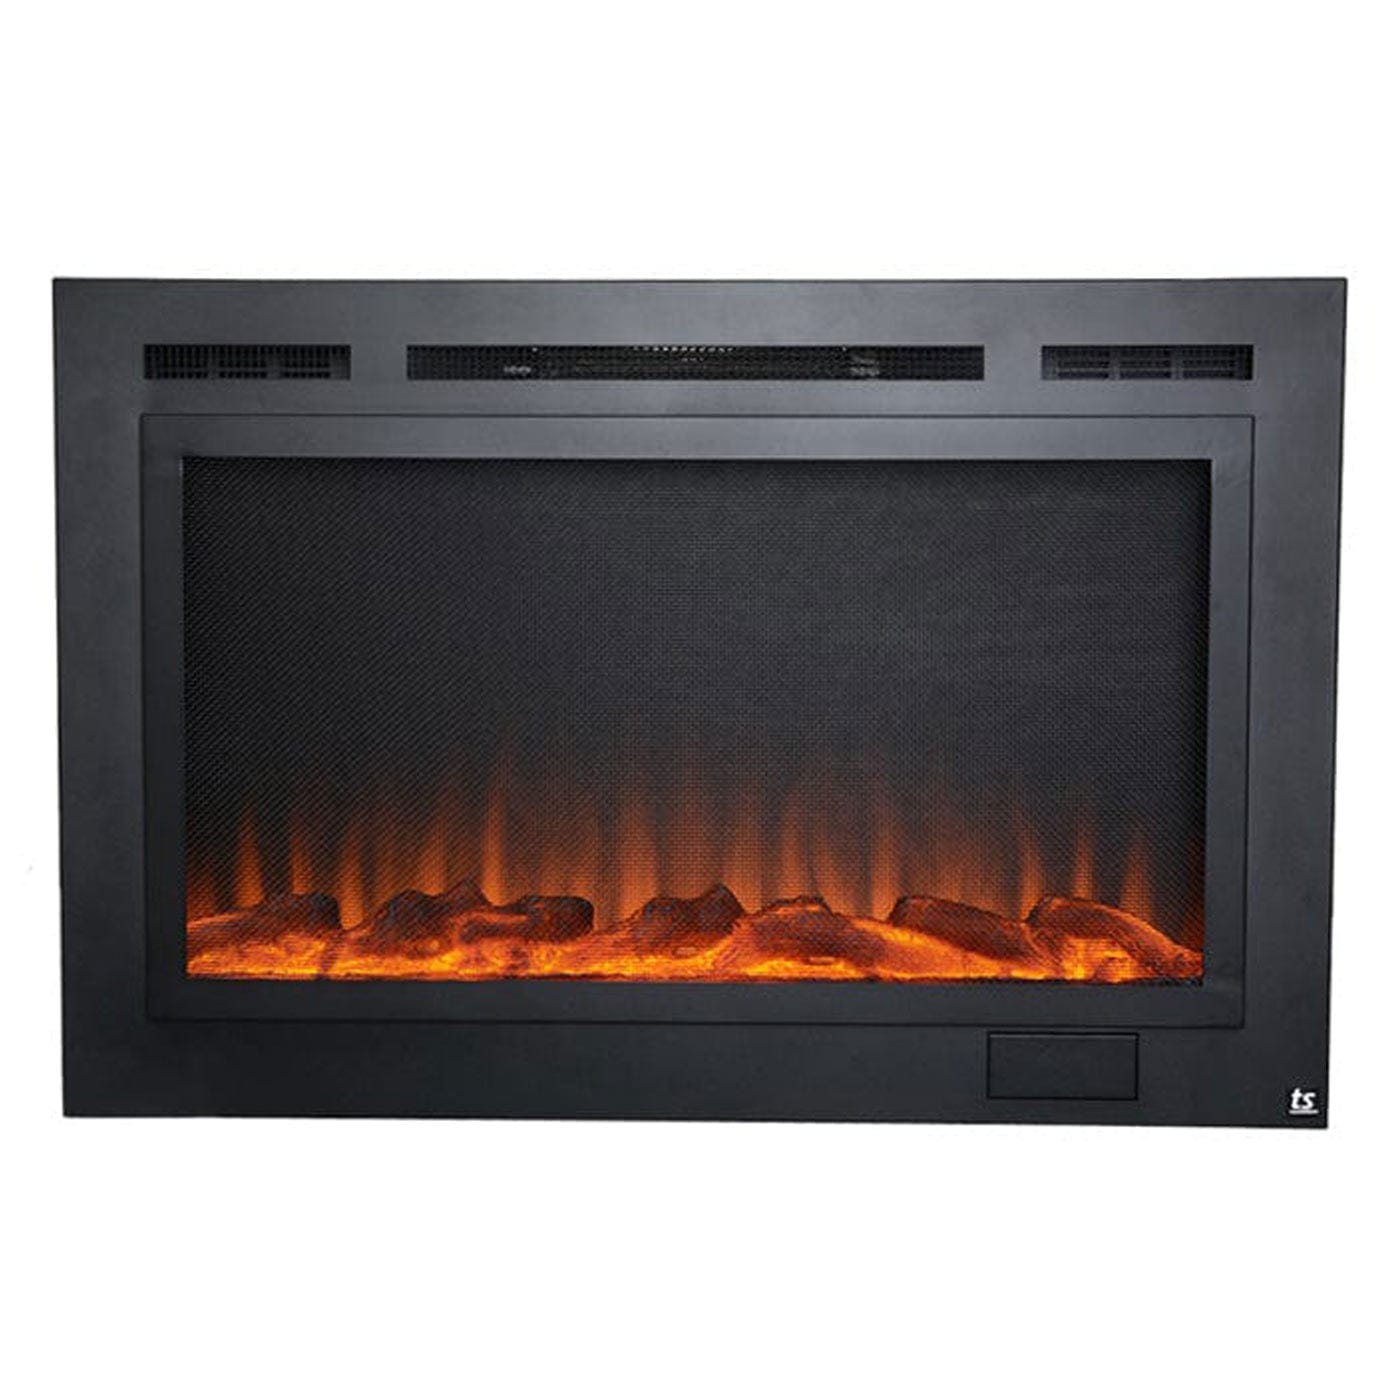 Touchstone 80047 Sideline Steel Mesh Screen Non Reflective Recessed  Electric Fireplace, 1500W Heat, Matte Black – Touchstone Home Products, Inc.